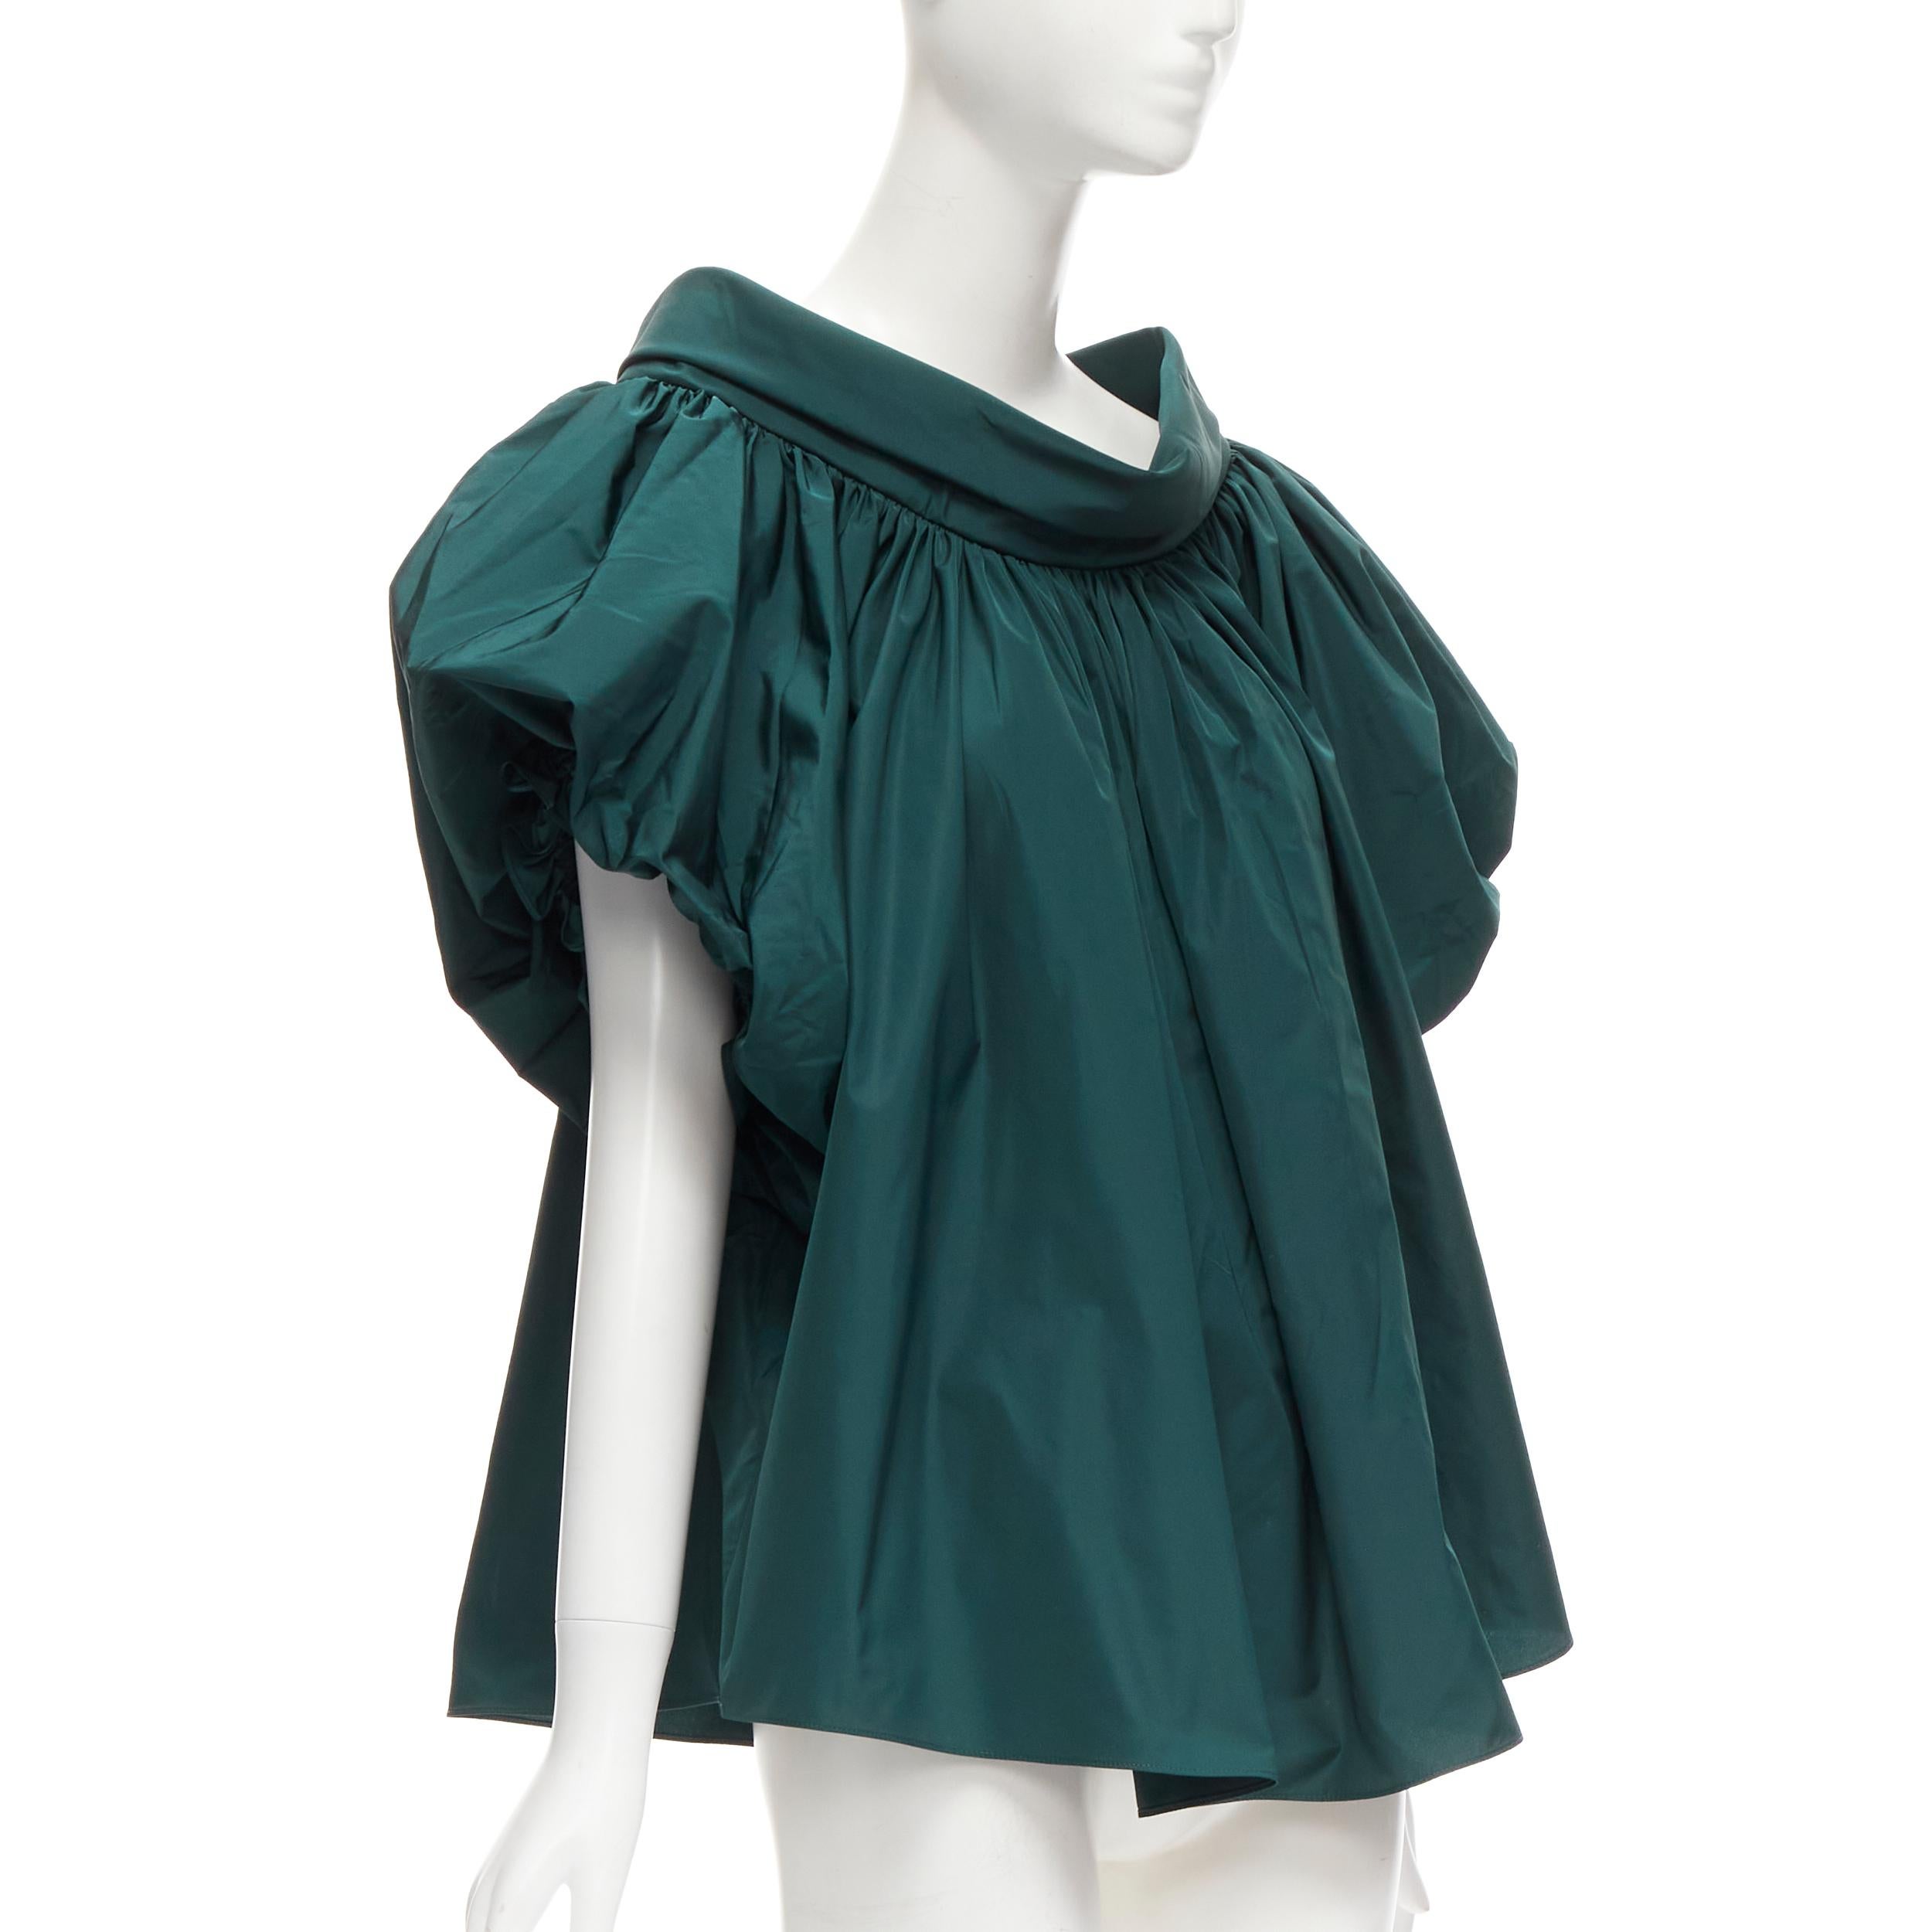 ALEXANDER MCQUEEN dark green puff sleeve bateau high collar flare top IT38 XS
Reference: AAWC/A00396
Brand: Alexander McQueen
Designer: Sarah Burton
Material: Polyester
Color: Green
Pattern: Solid
Closure: Pullover
Made in: